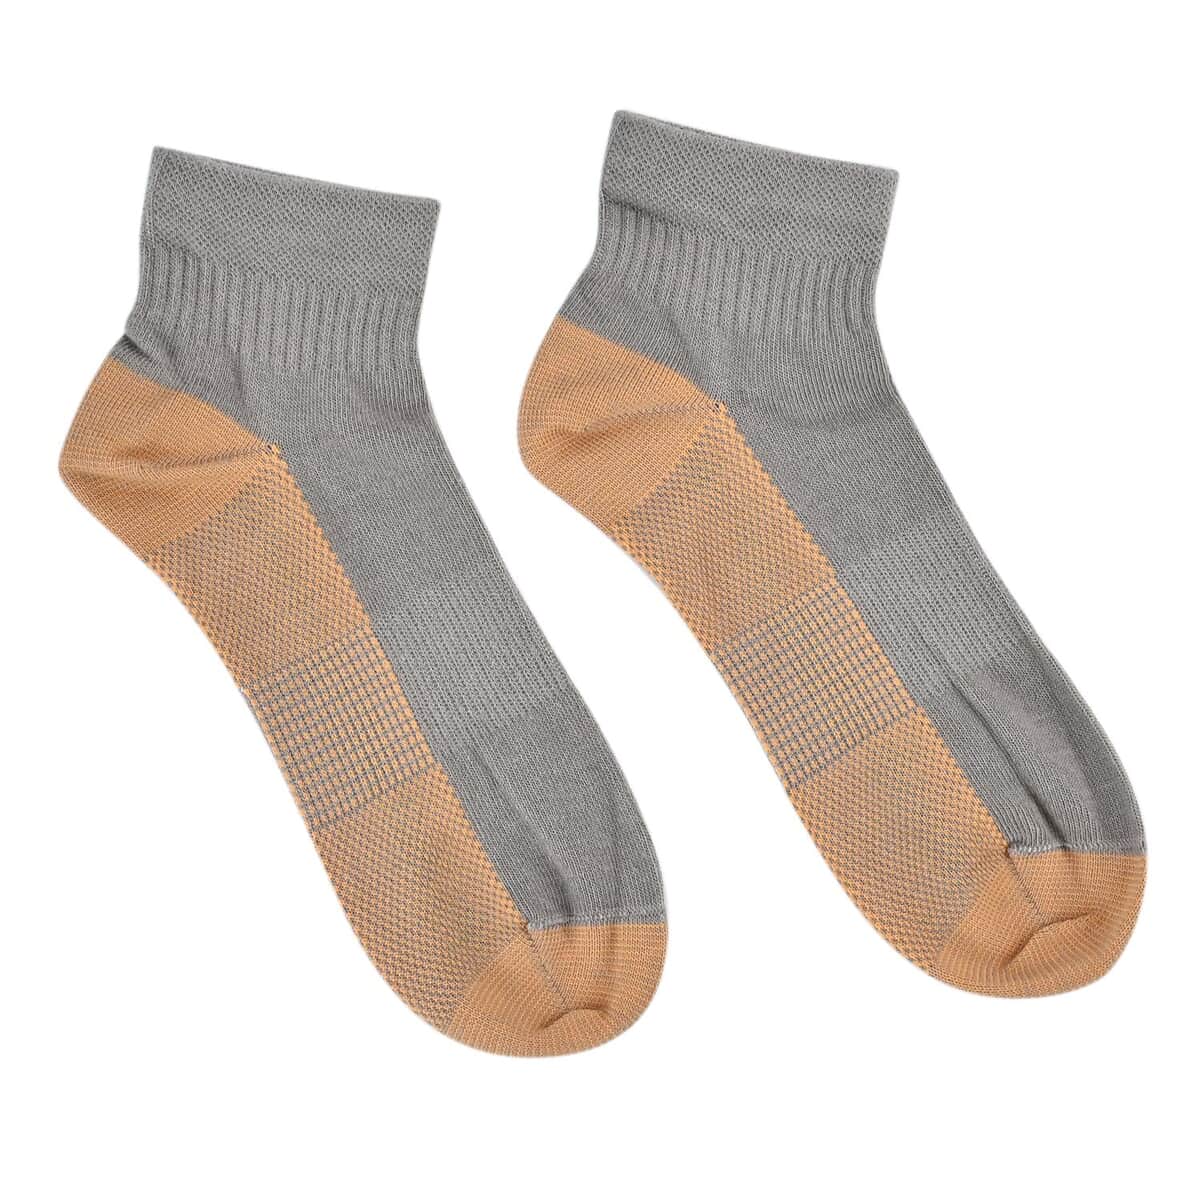 Set of 4 Pairs of Ankle Length Odor Free Copper Compression Socks For Men And Women, Premium Material Moisture Wicking Unisex Copper Infused Socks - Gray, Brown, Blue and White (S/M) image number 1